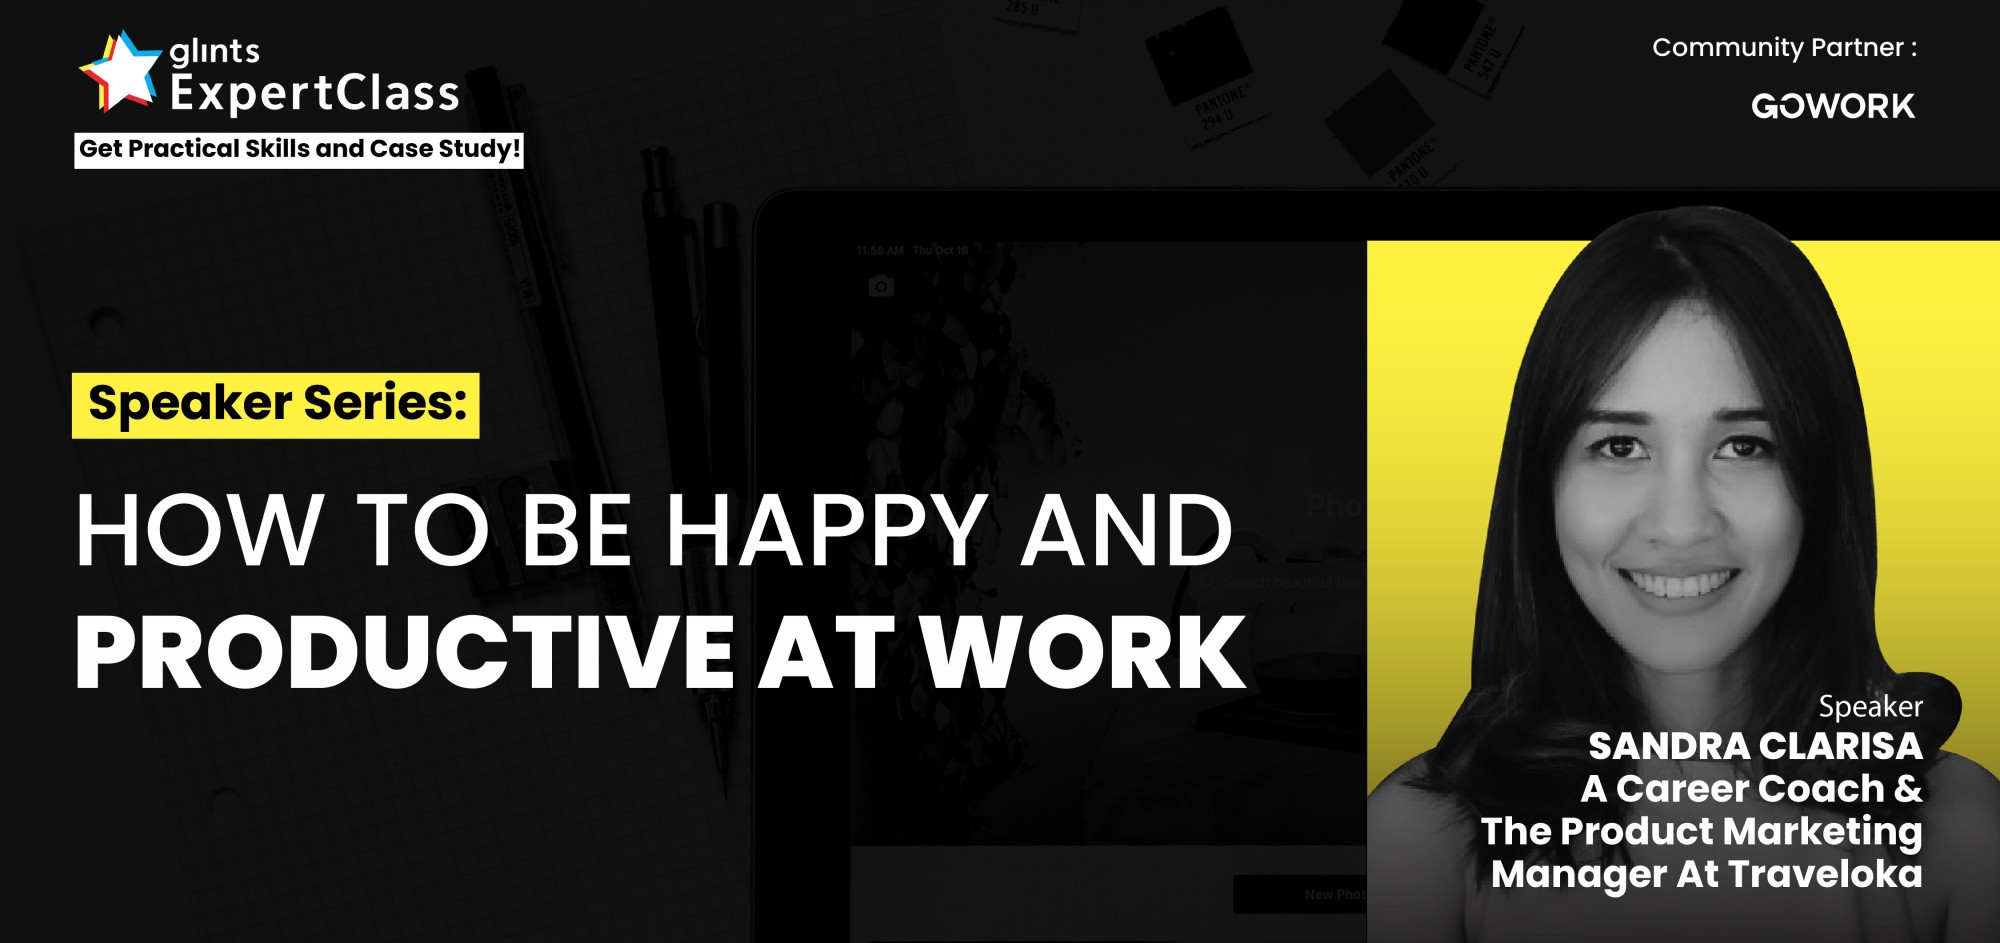  [Online Glints ExpertClass] How to Be Happy and Productive At Work